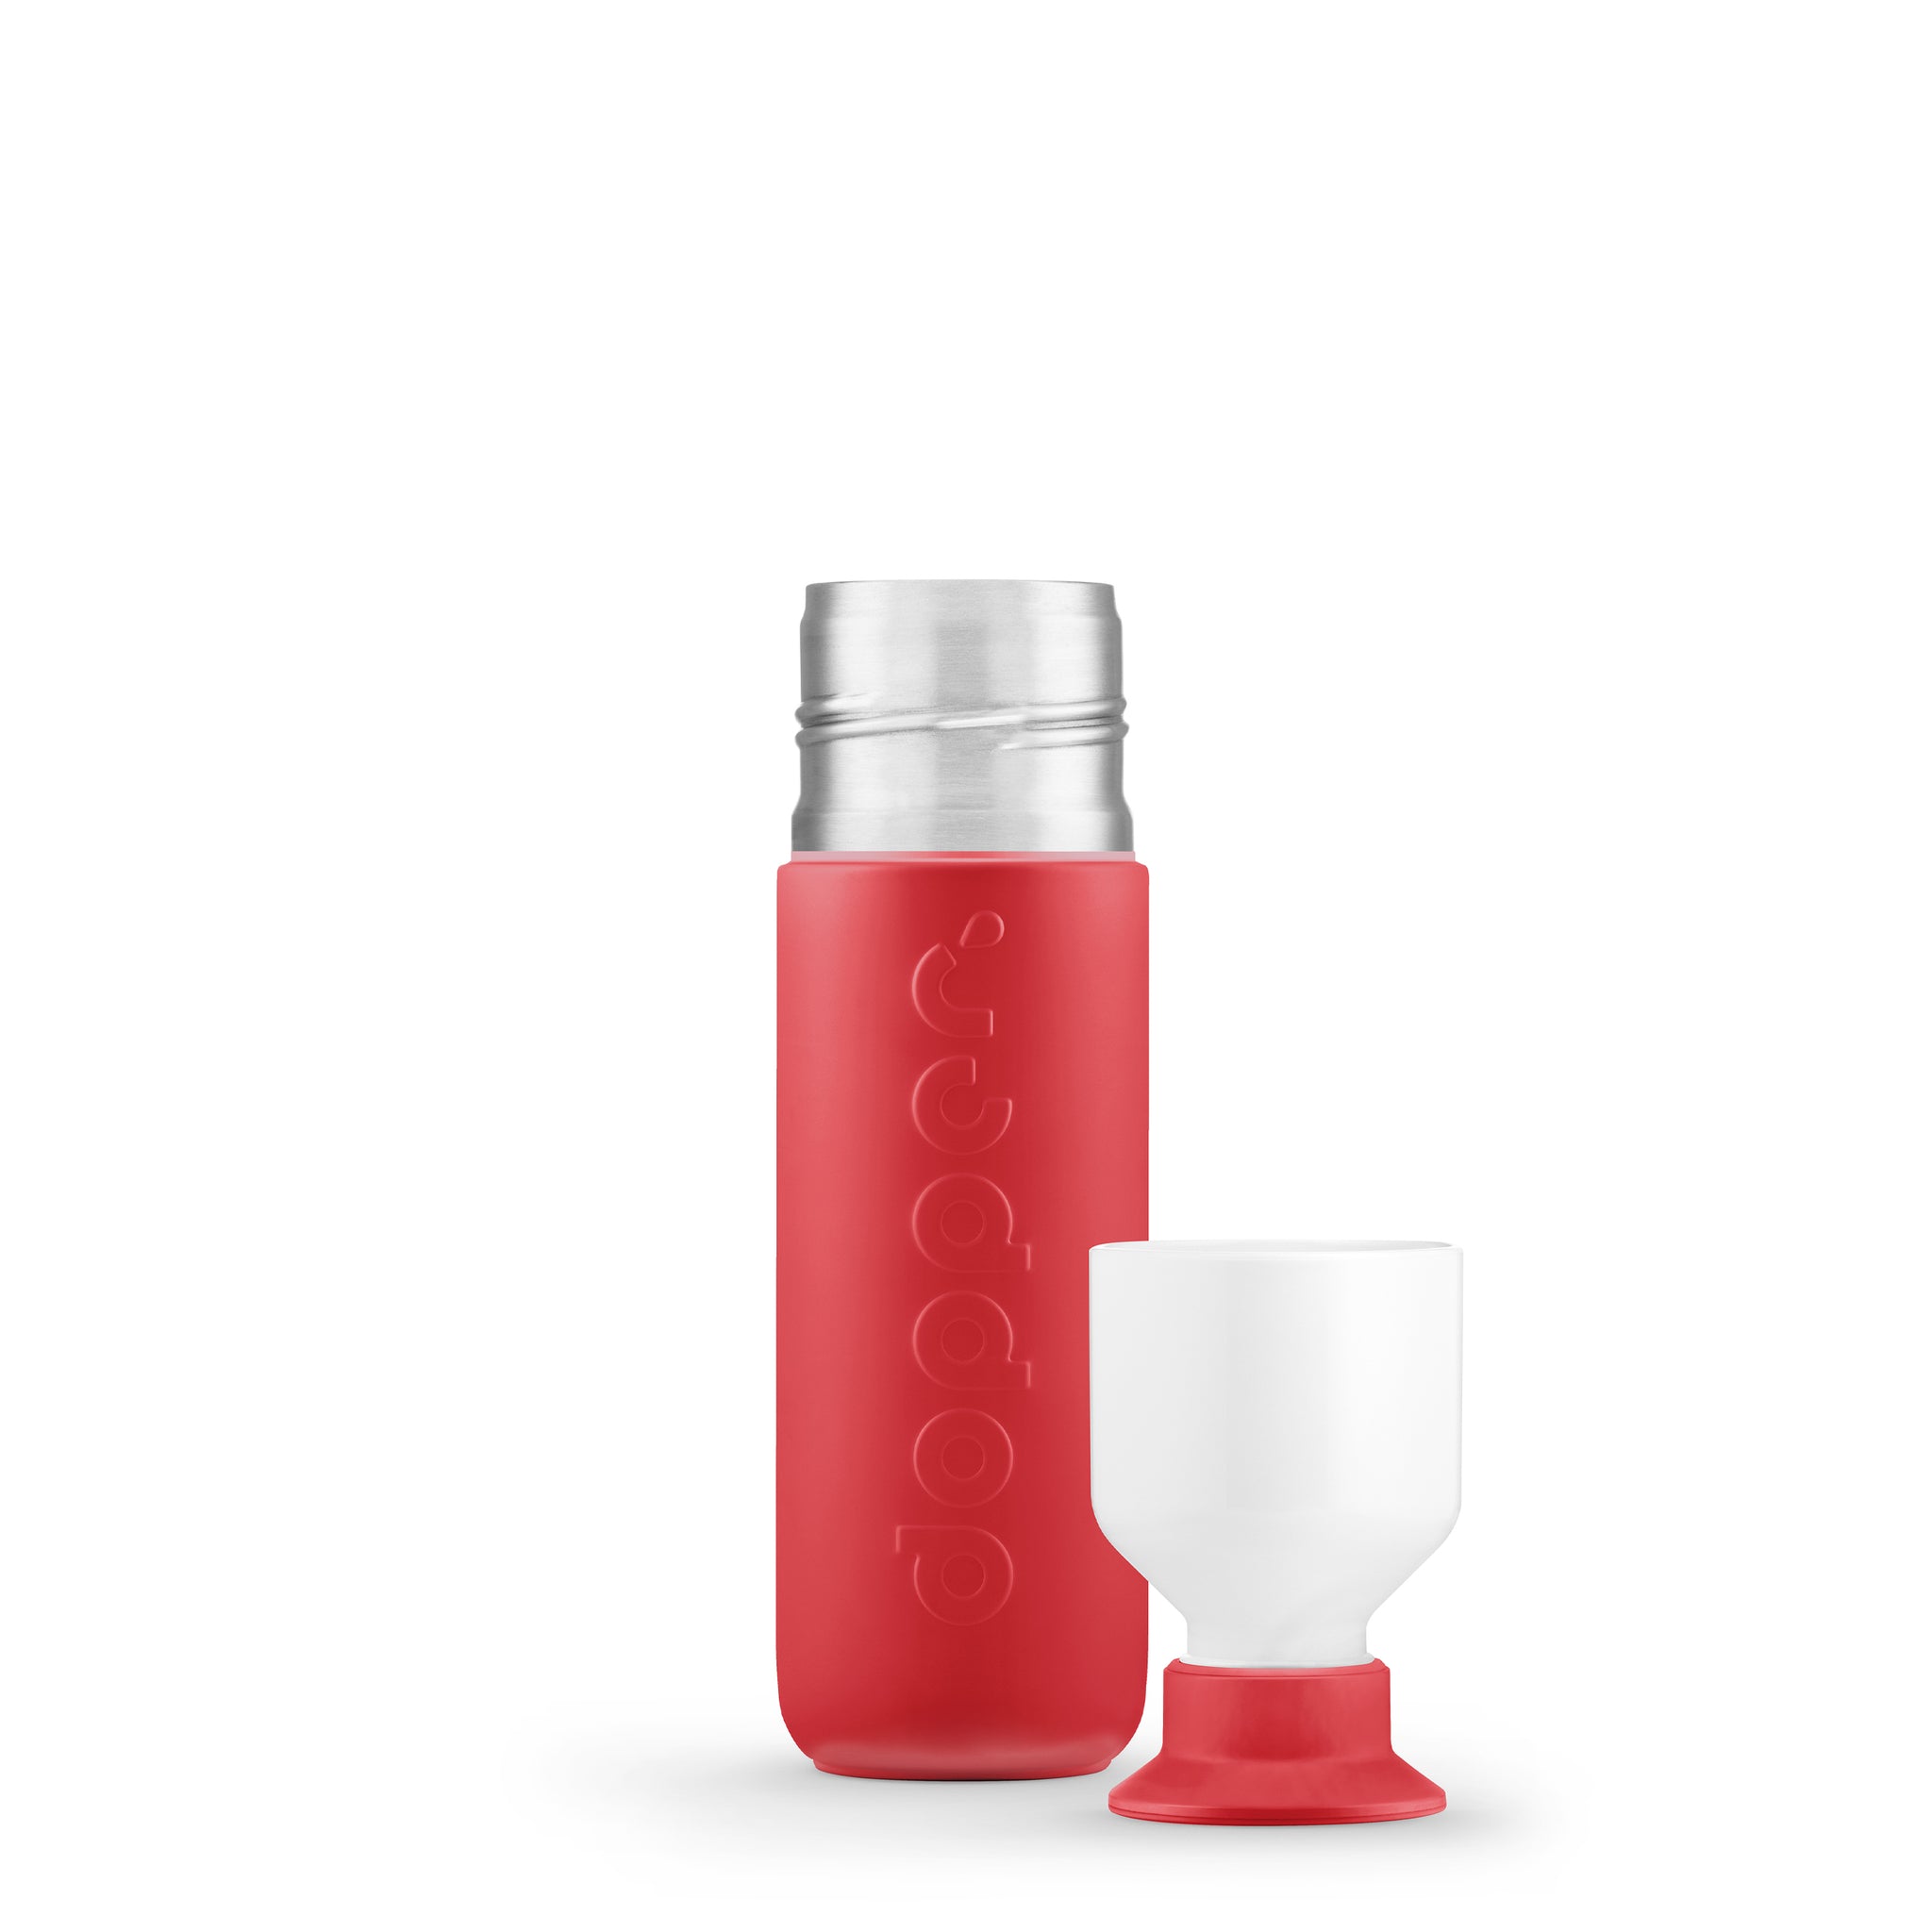 Dopper Insulated Small Deep Coral│Thermosfles 350ml Rood│art. 5272│voorkant met dop als beker